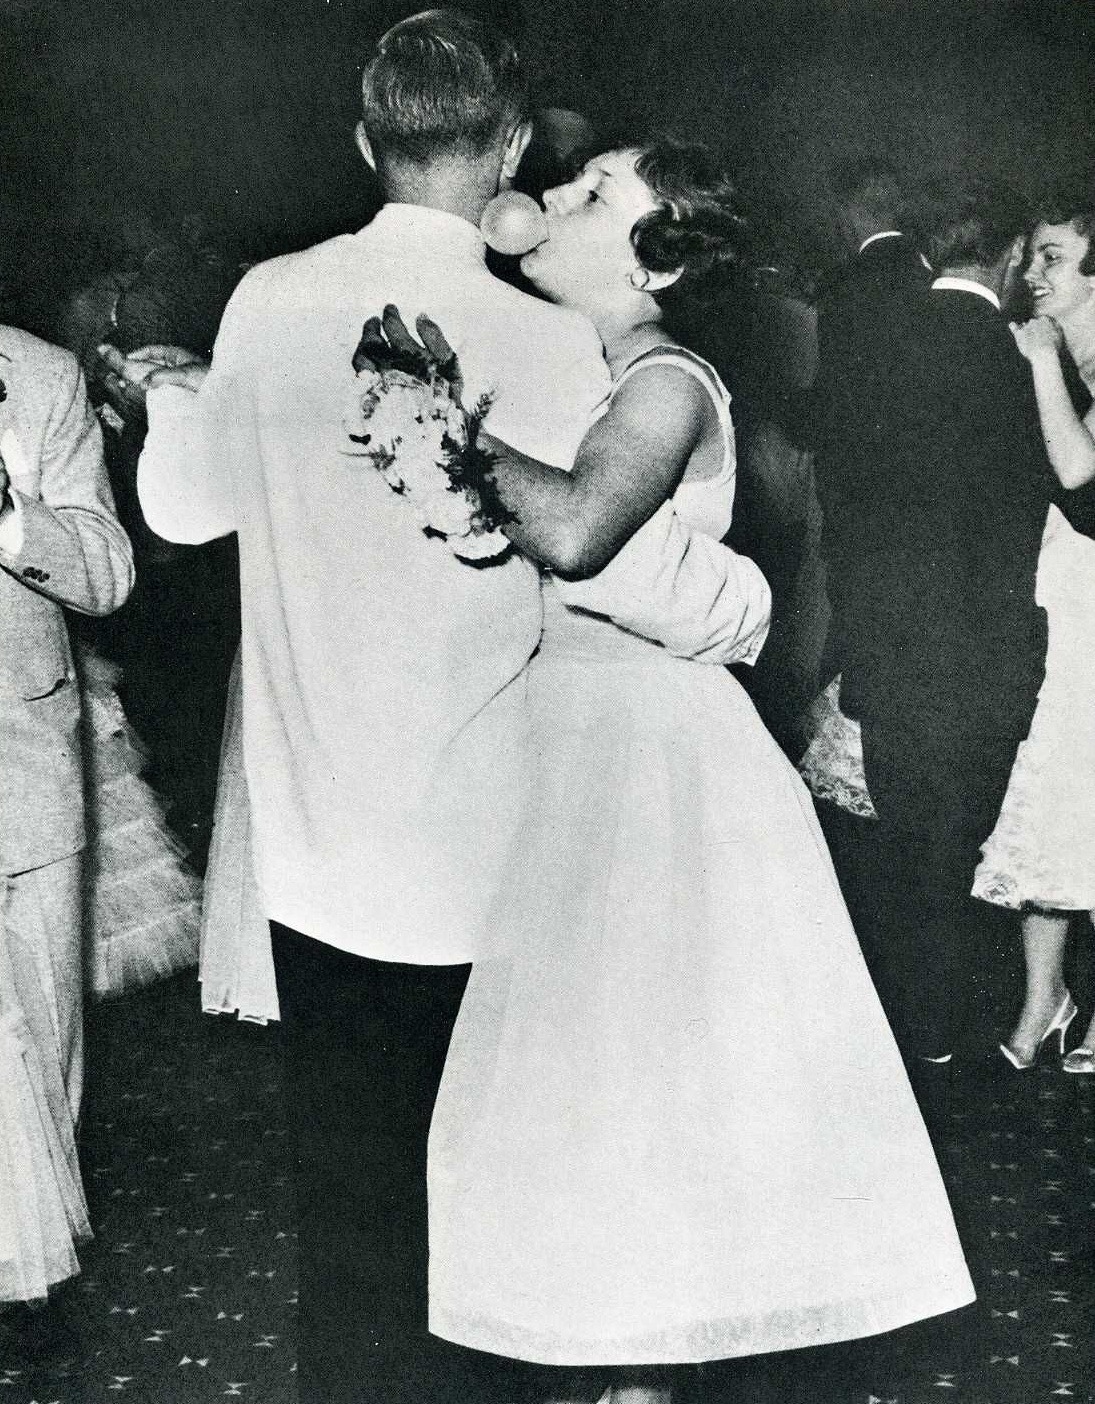 At her high school graduation prom, Suzie Spear of La Porte, Indiana, whispers sweet